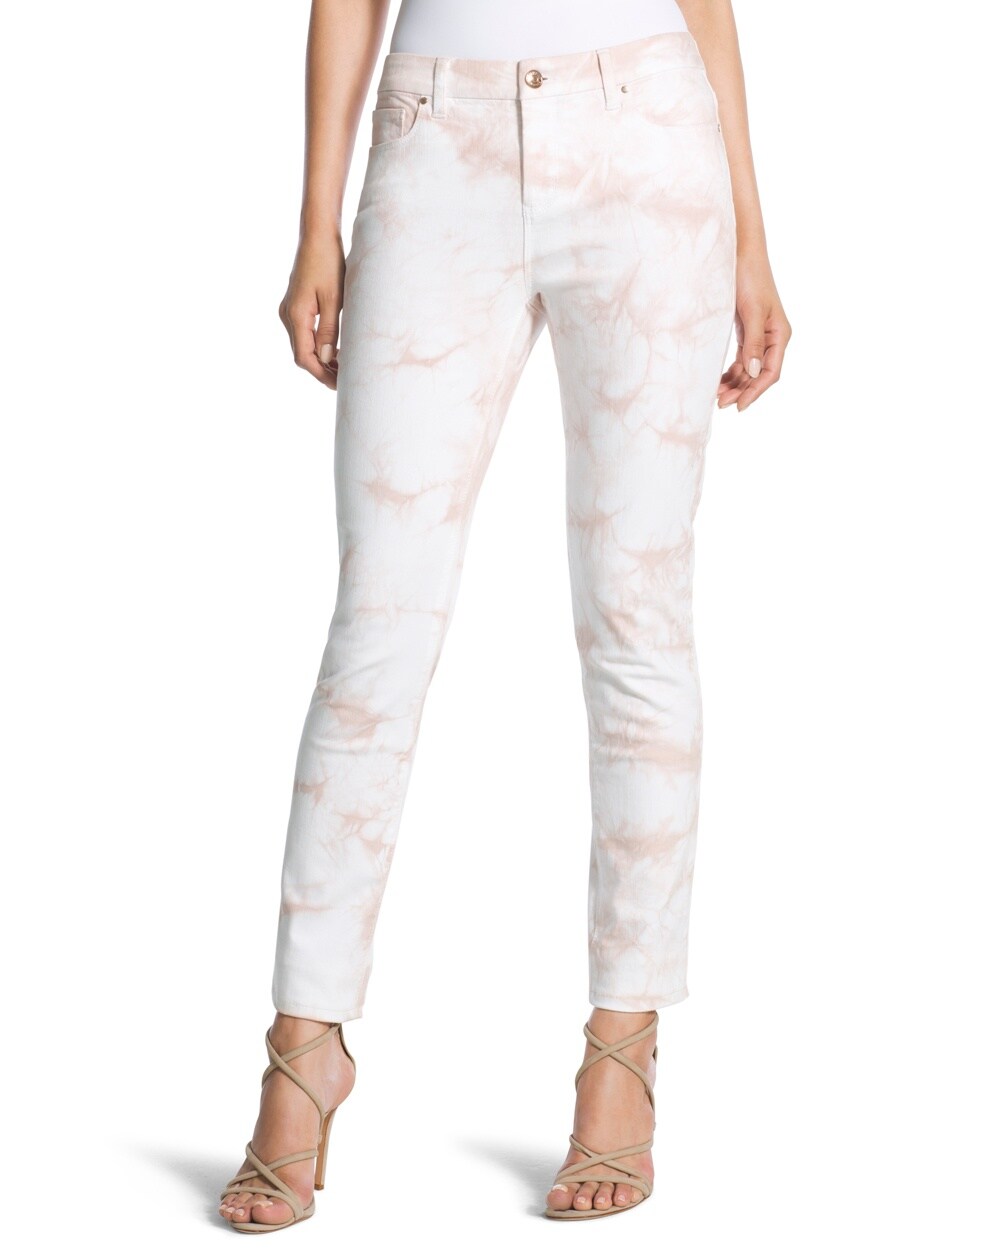 Tie-Dye Ankle Jeans - Chico's